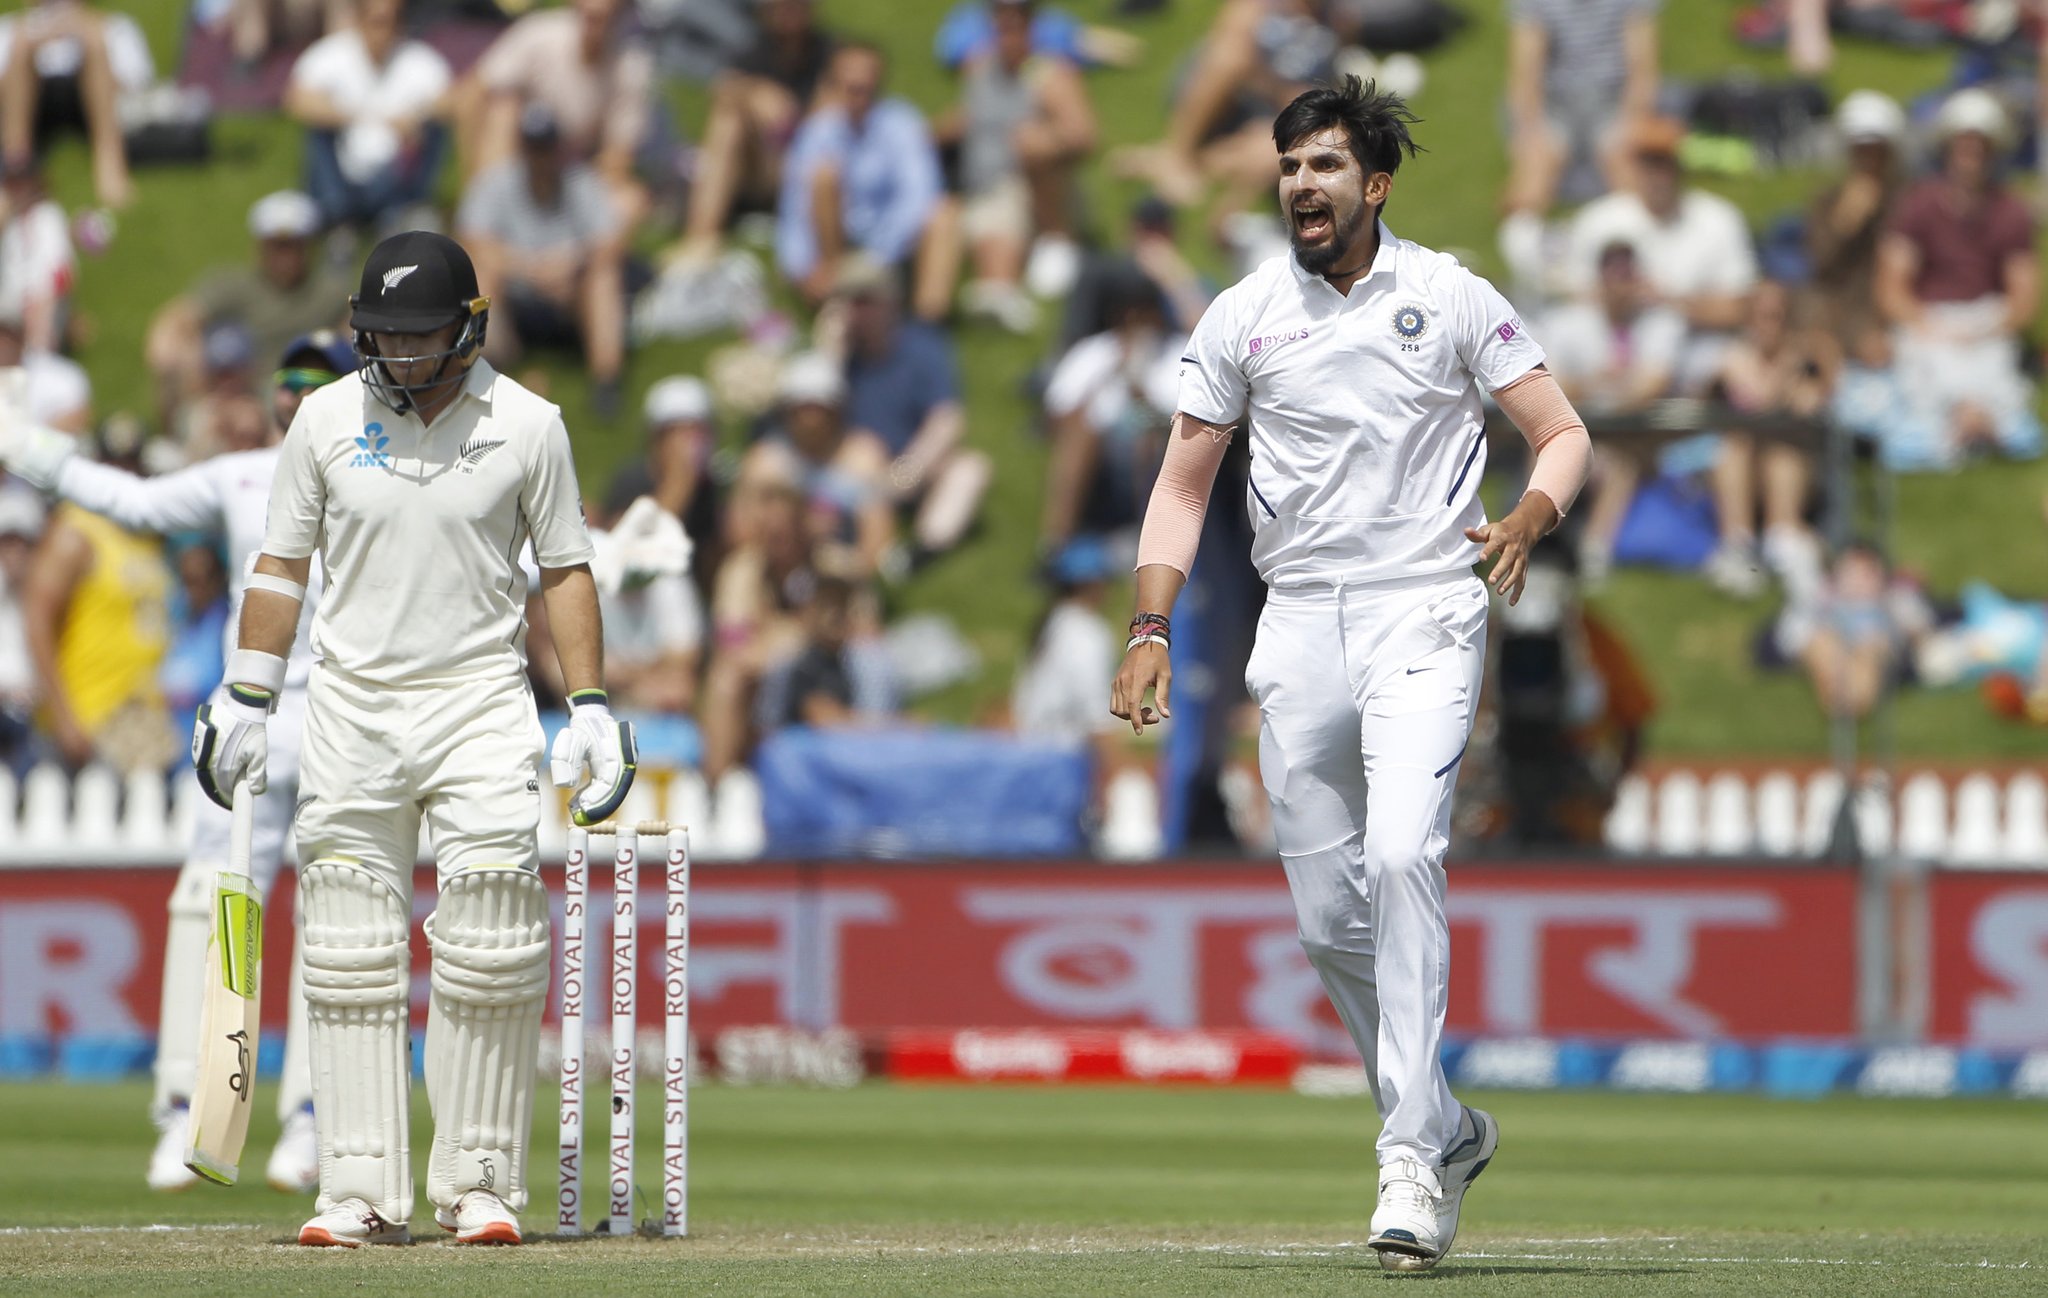 New Zealand 216-5 at stumps on day 2 of first Test